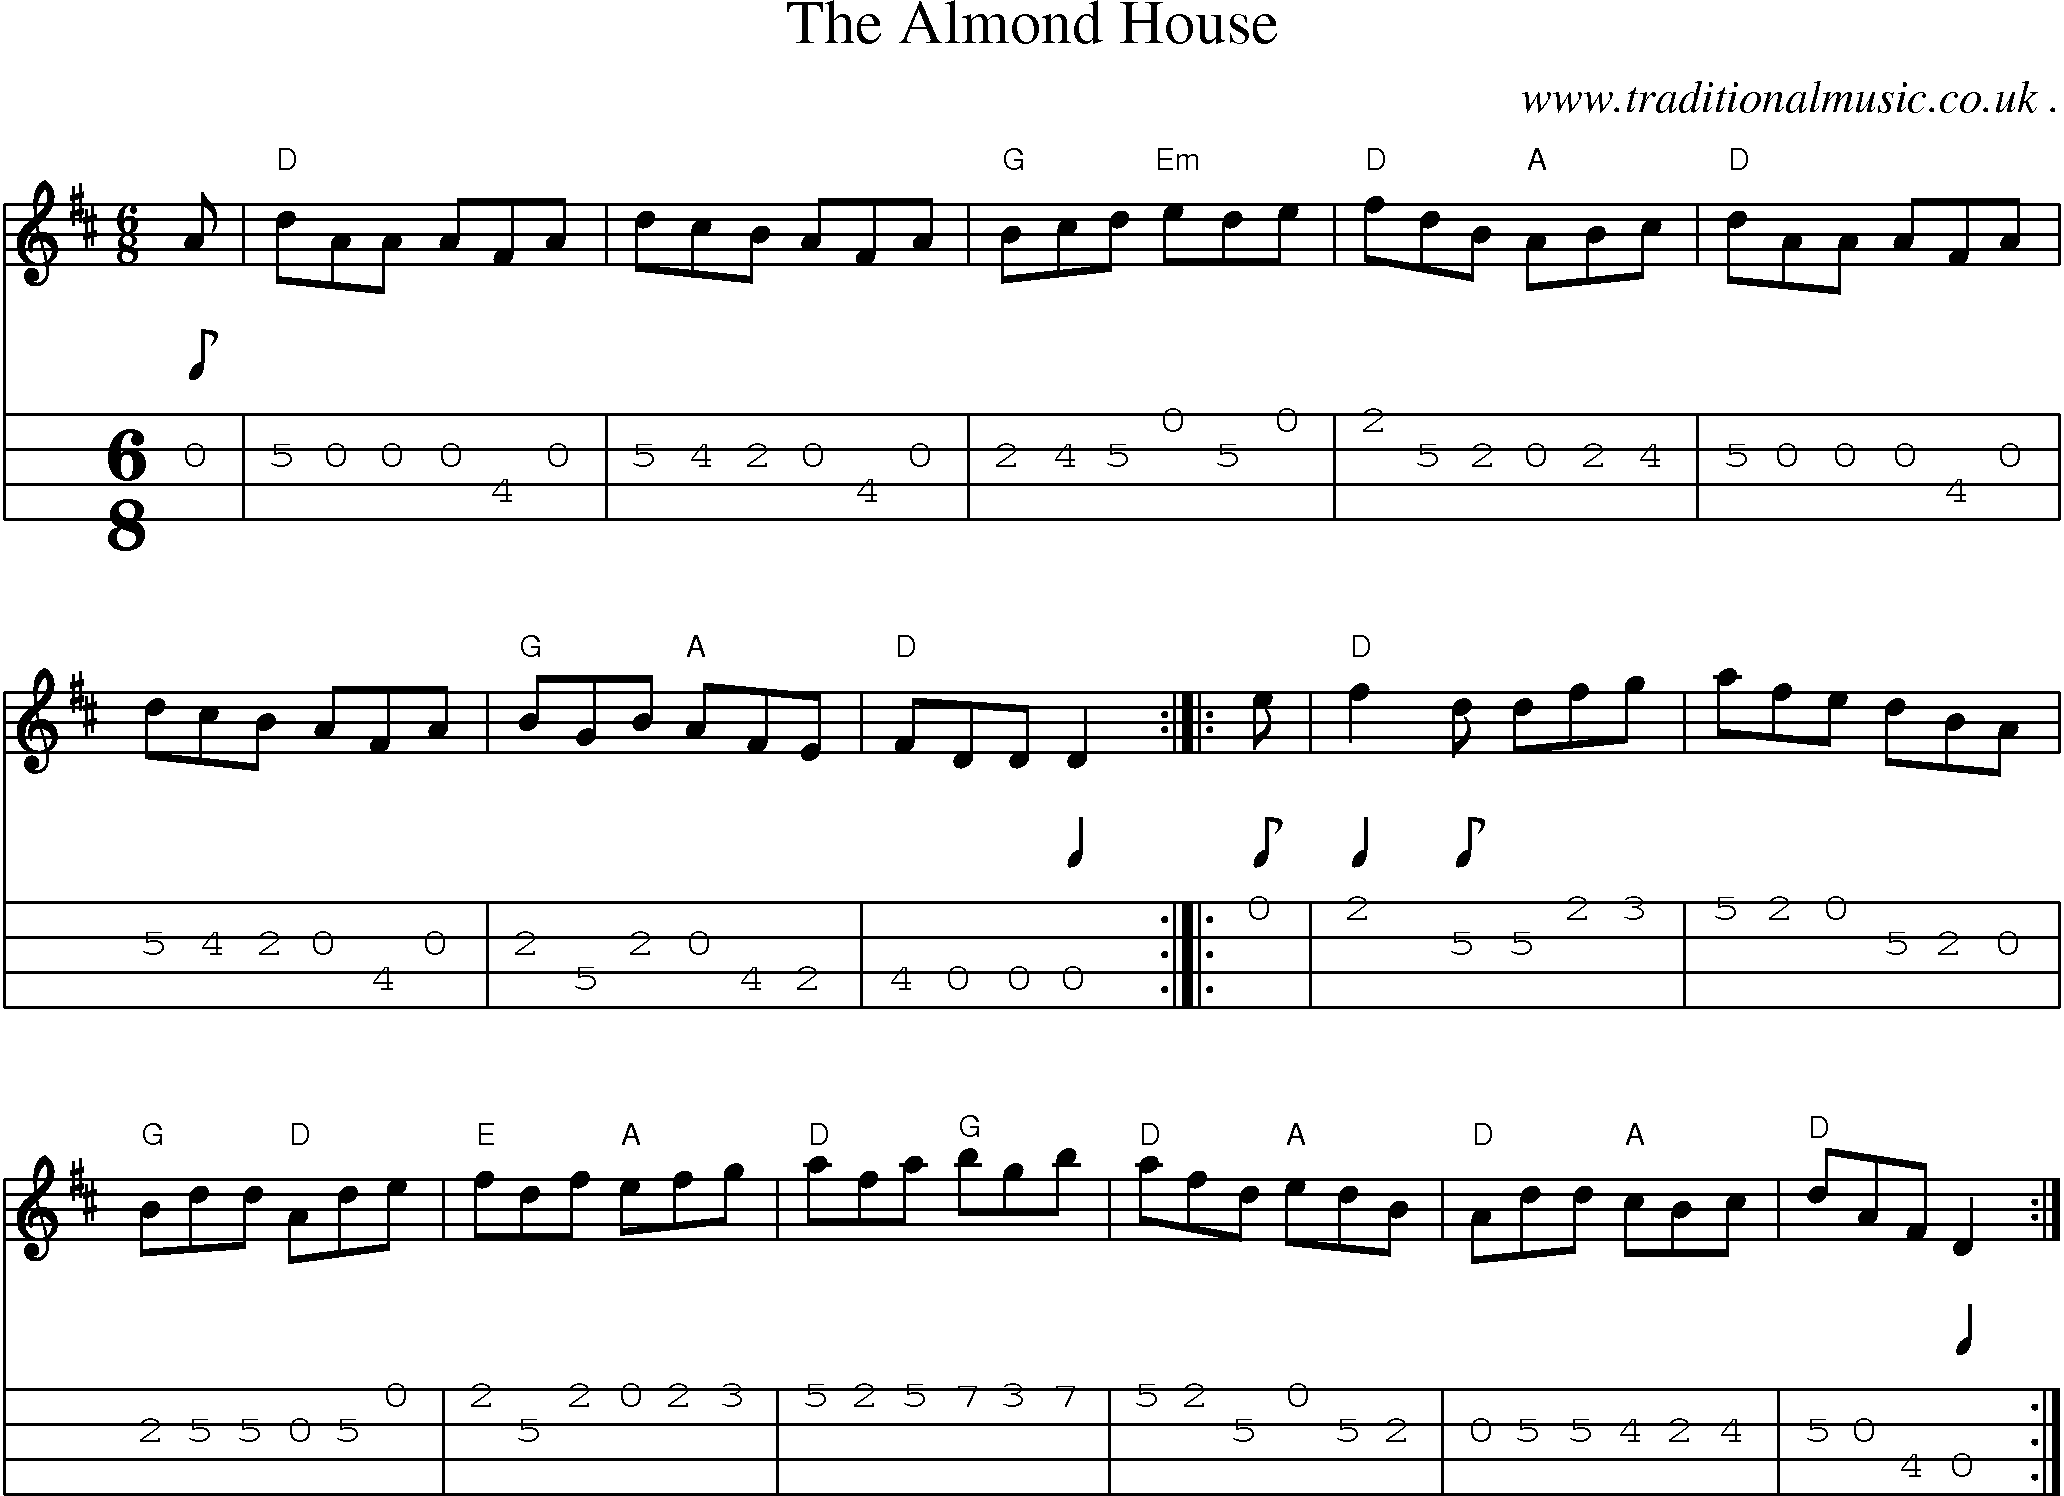 Music Score and Guitar Tabs for The Almond House